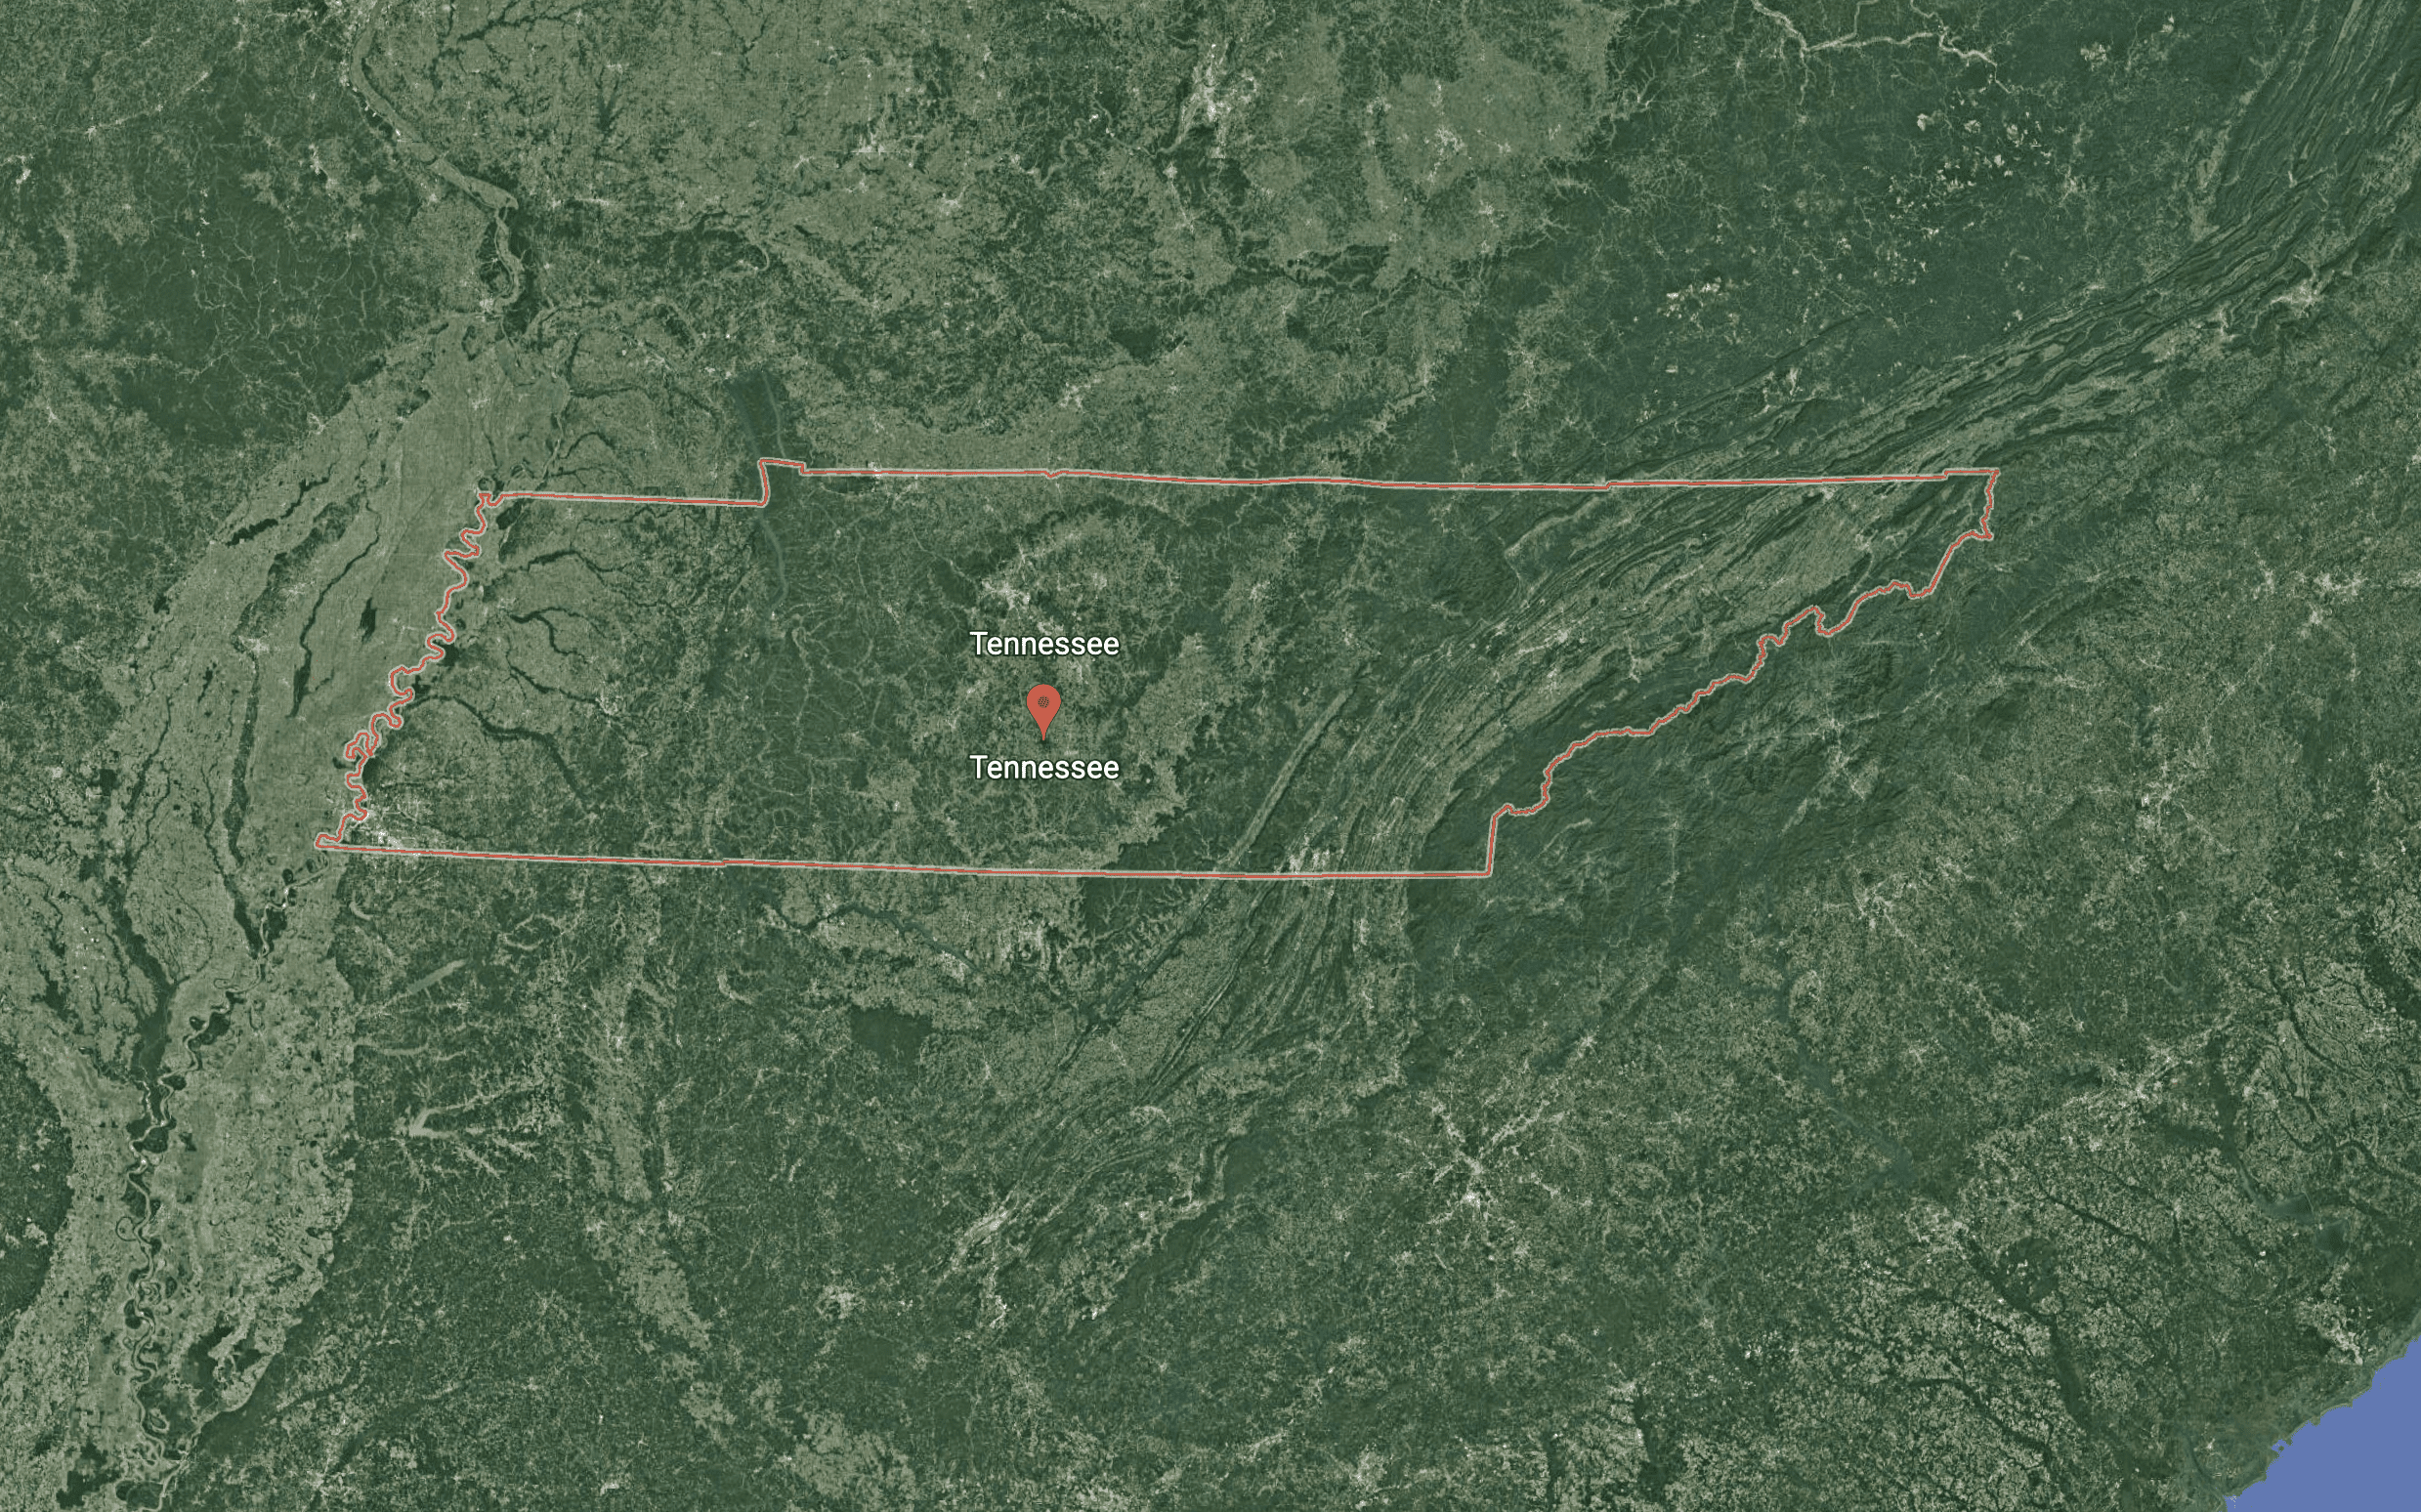 Satellite overhead image of Tennessee from Google Earth 2022